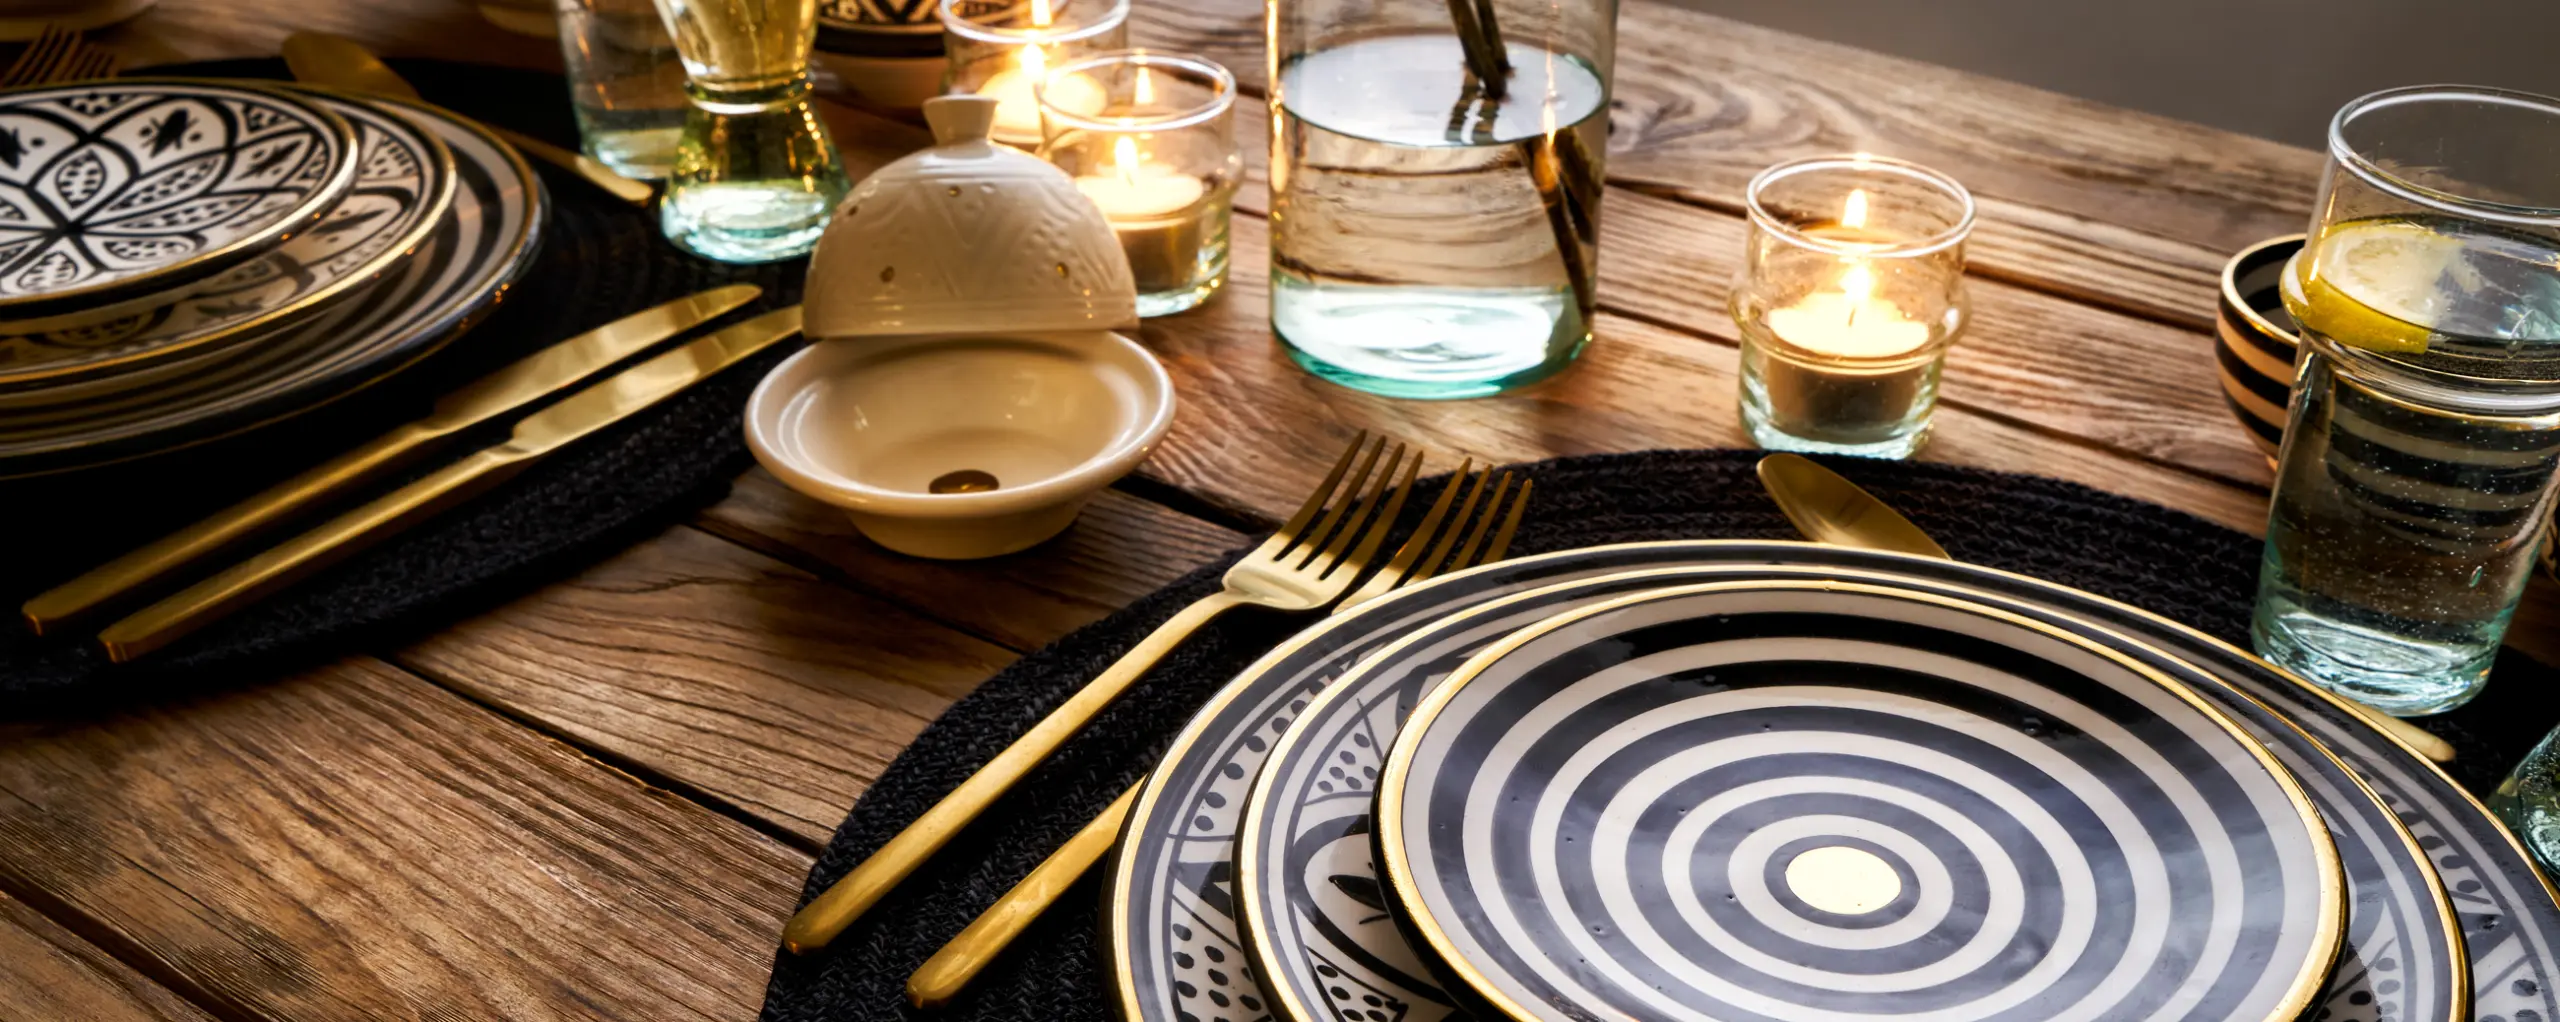 tabletop photography of plates and decoration, glasses and cutlery